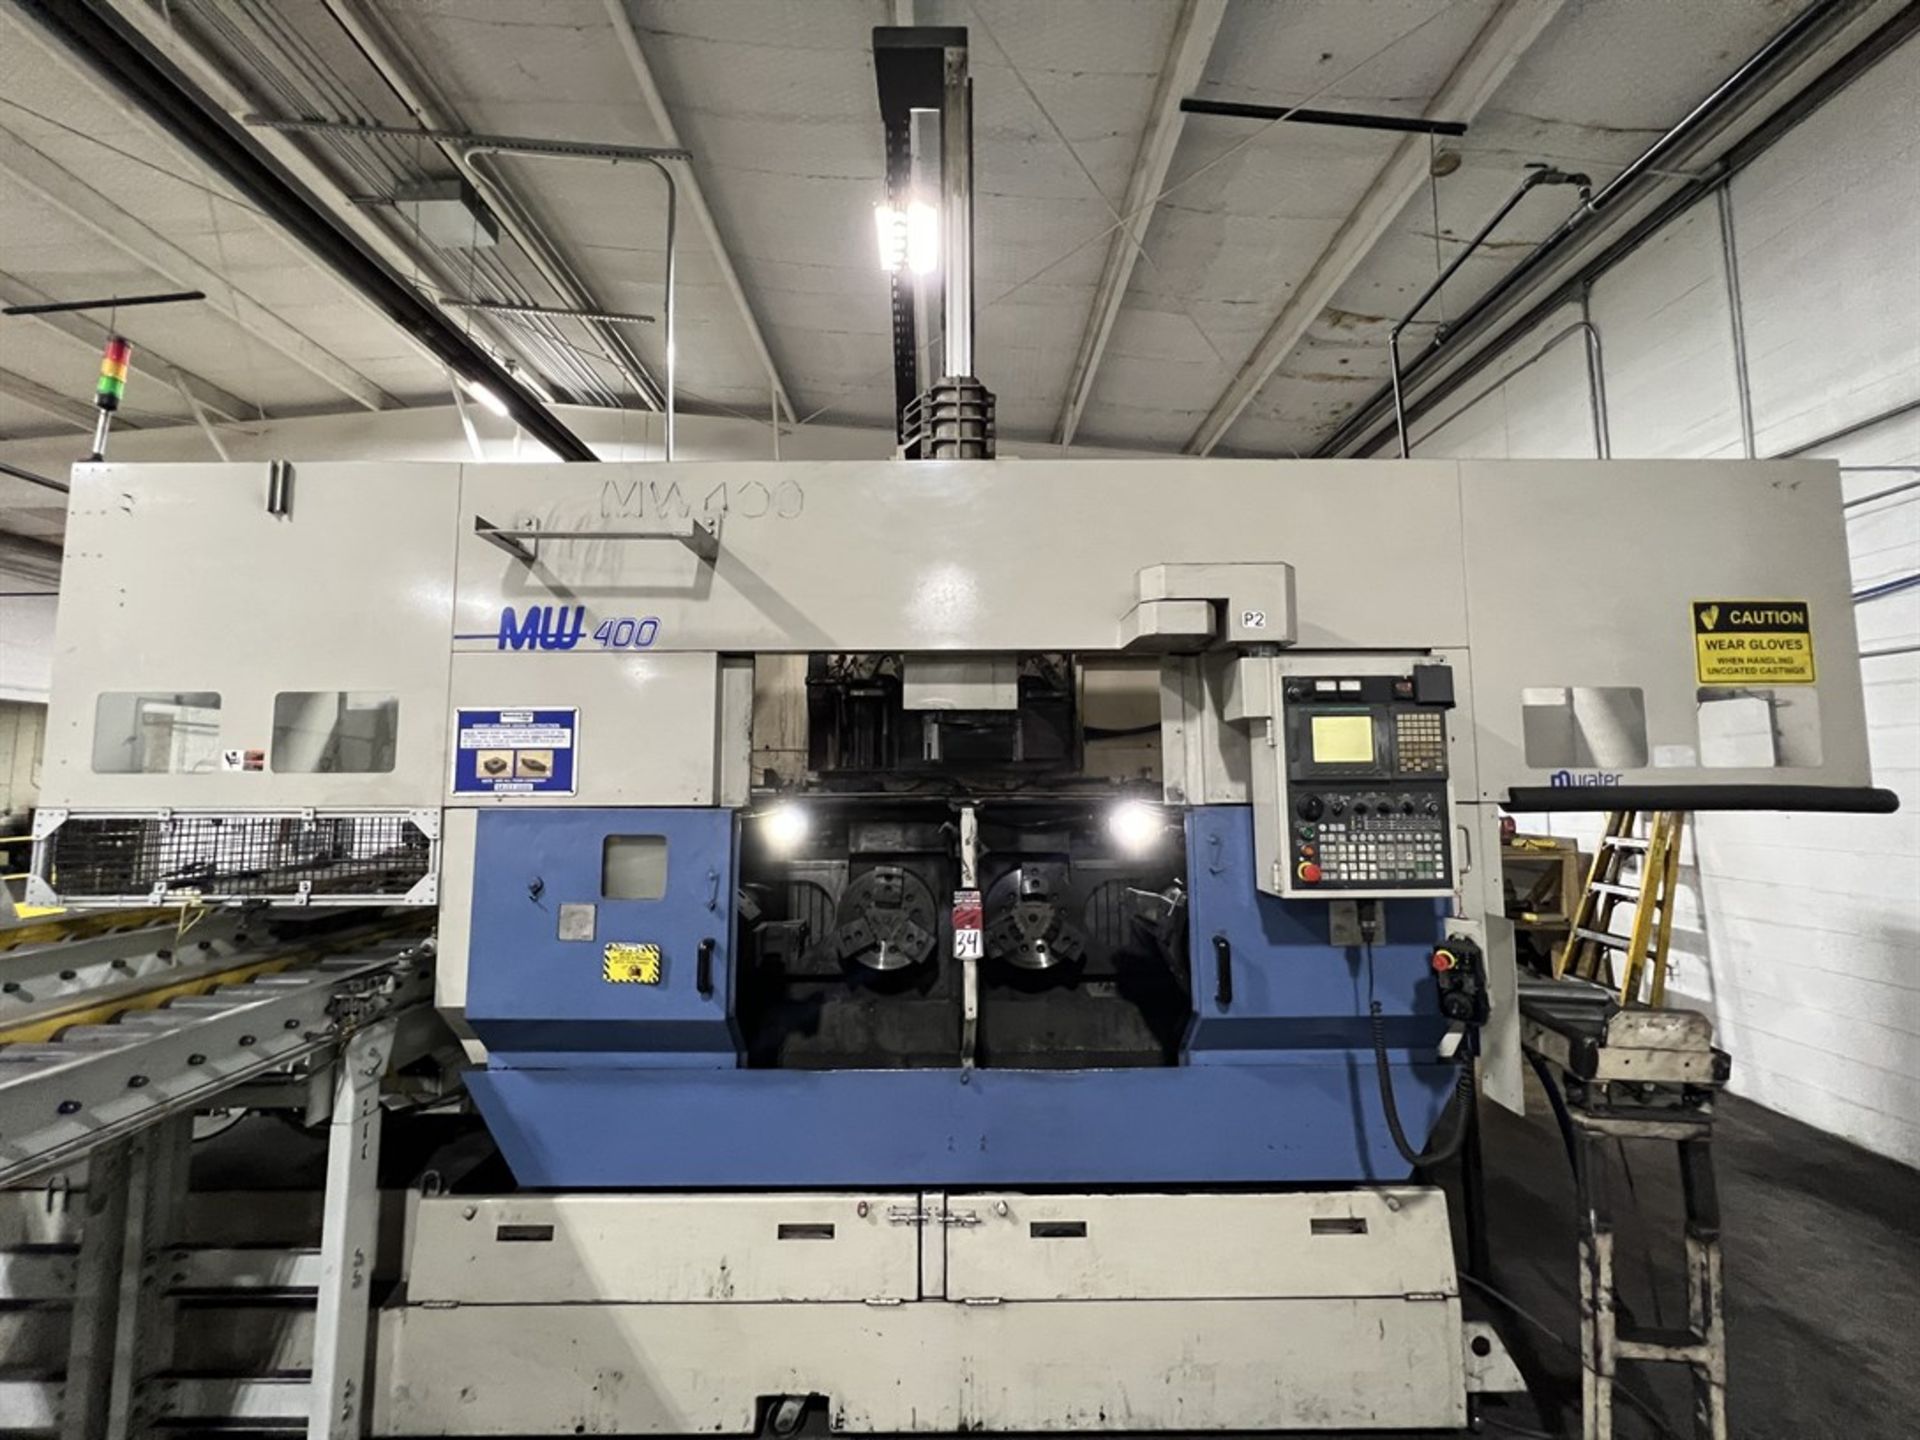 2006 MURATEC MW400 Dual Spindle Turning Center w/ Gantry Loader, s/n 05KX272740001, Muratec-Fanuc - Image 2 of 9